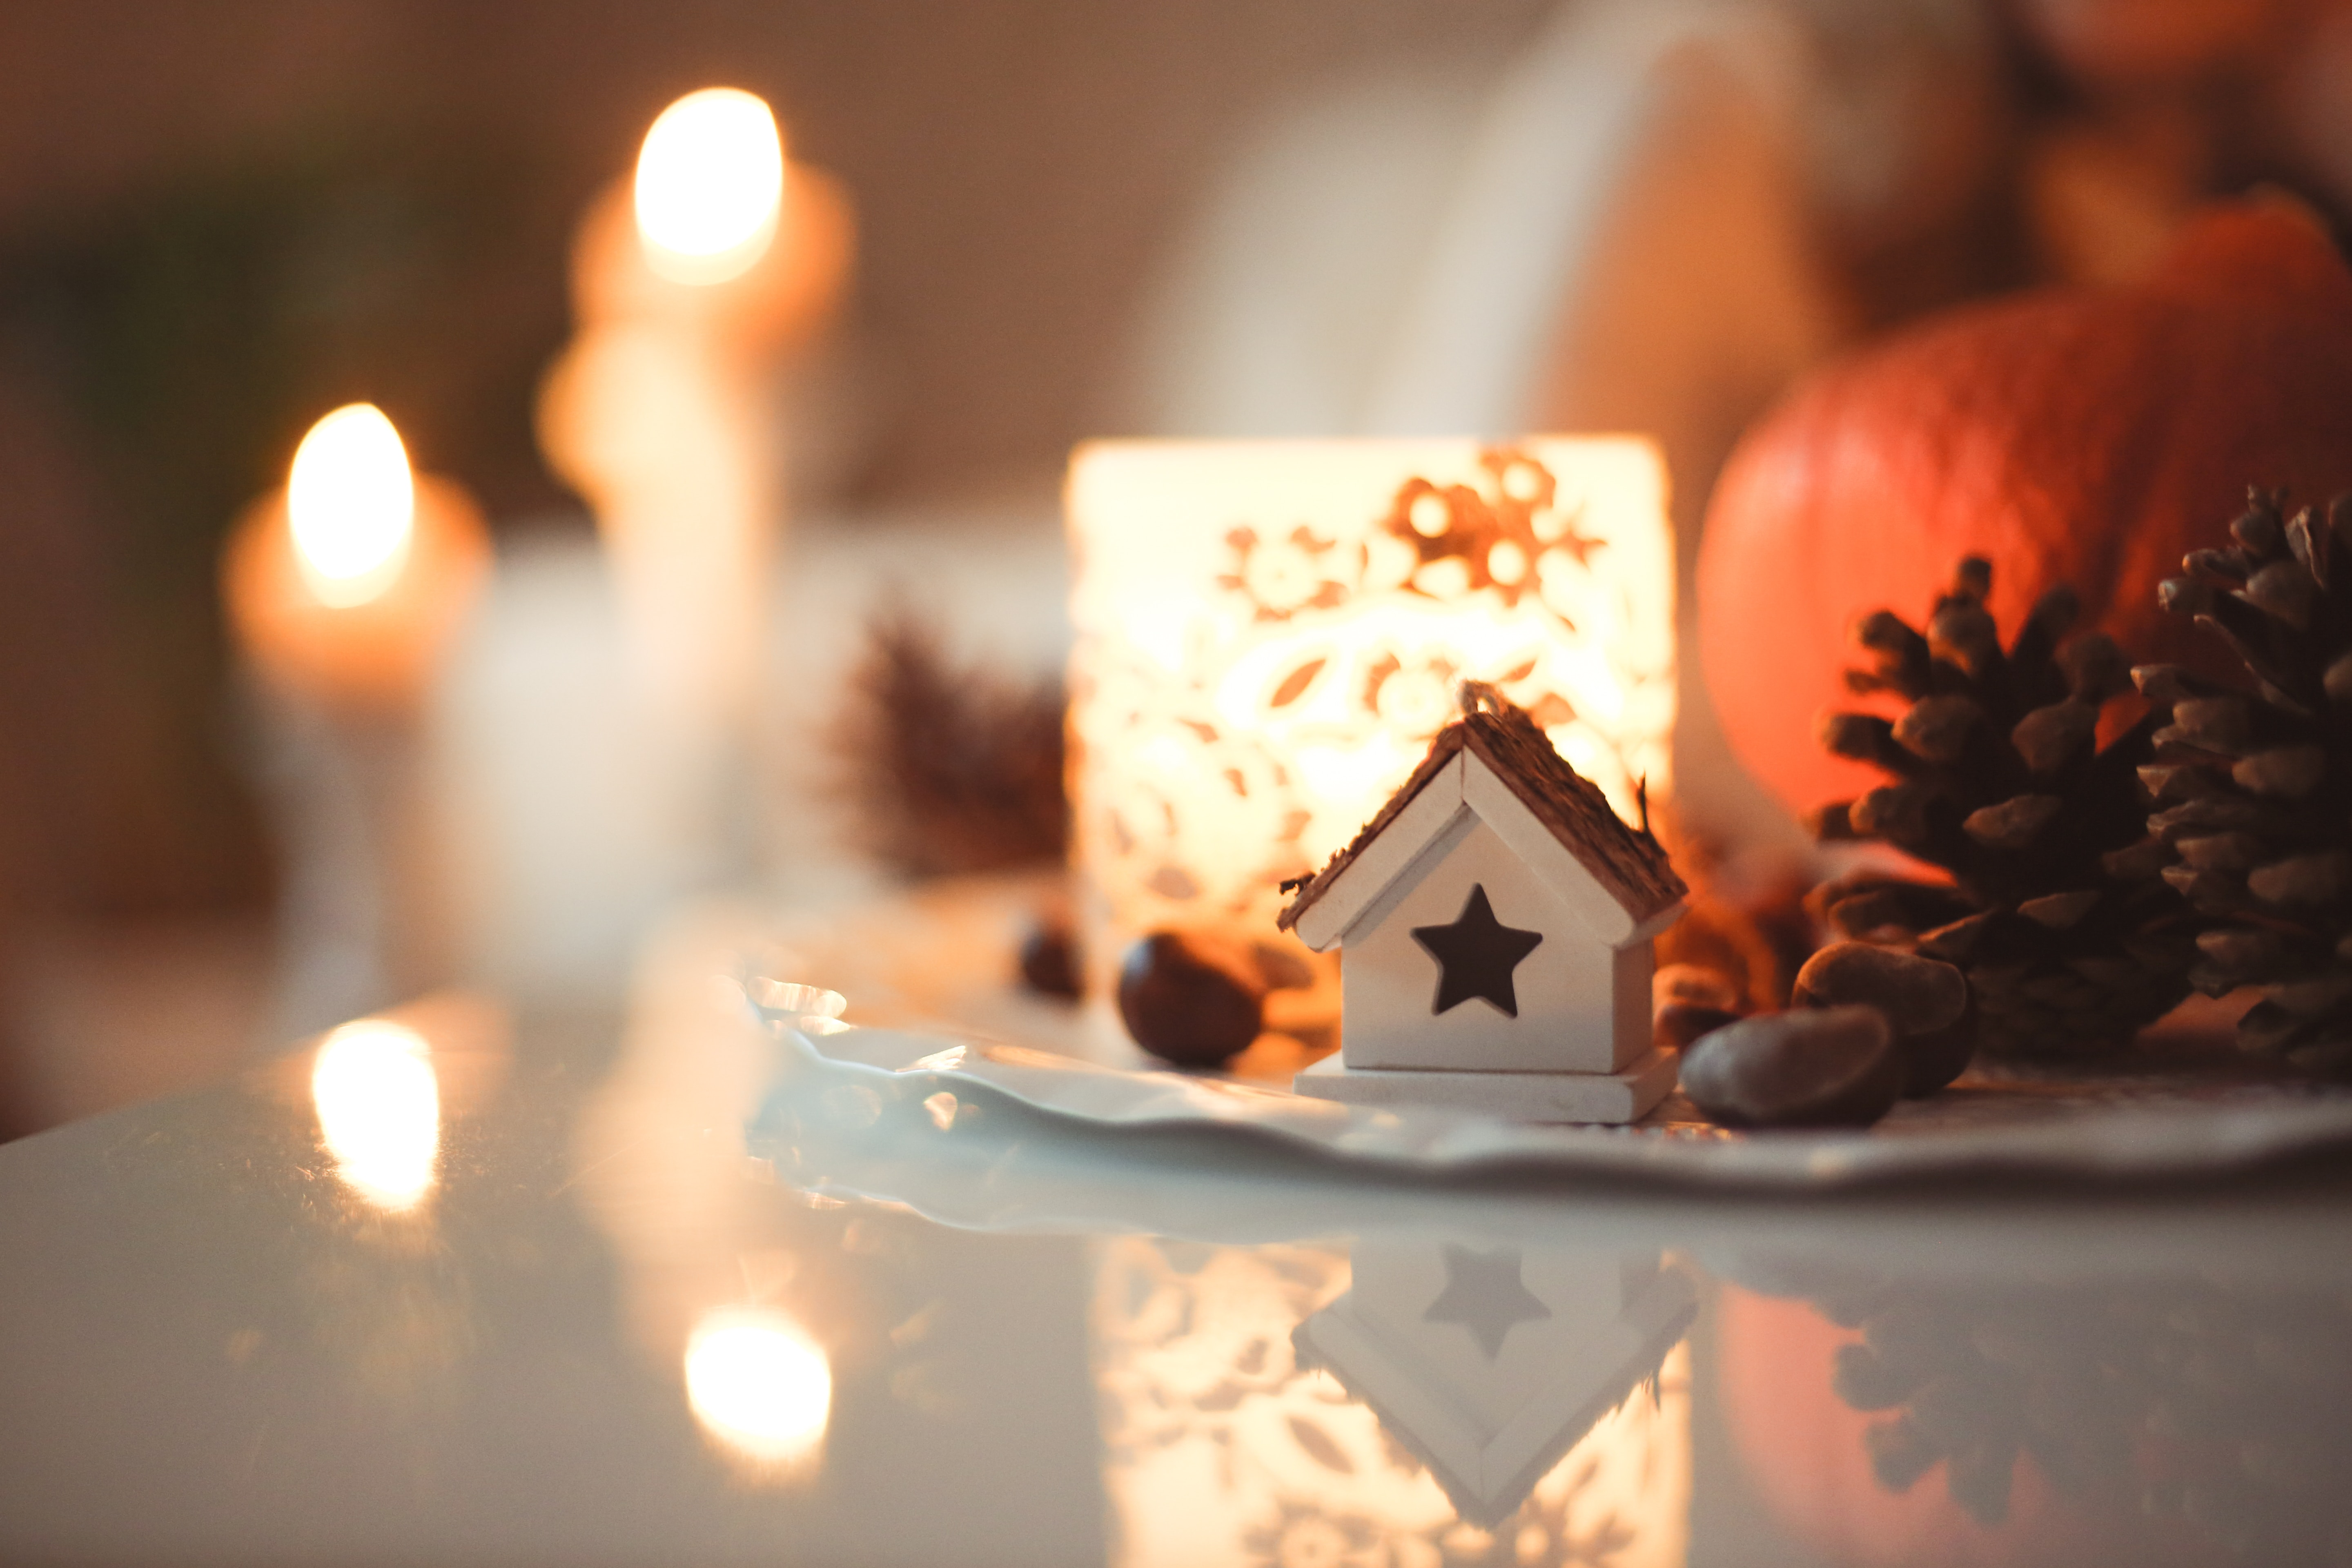 DIY Holiday Decor to Make Your House Feel Festive